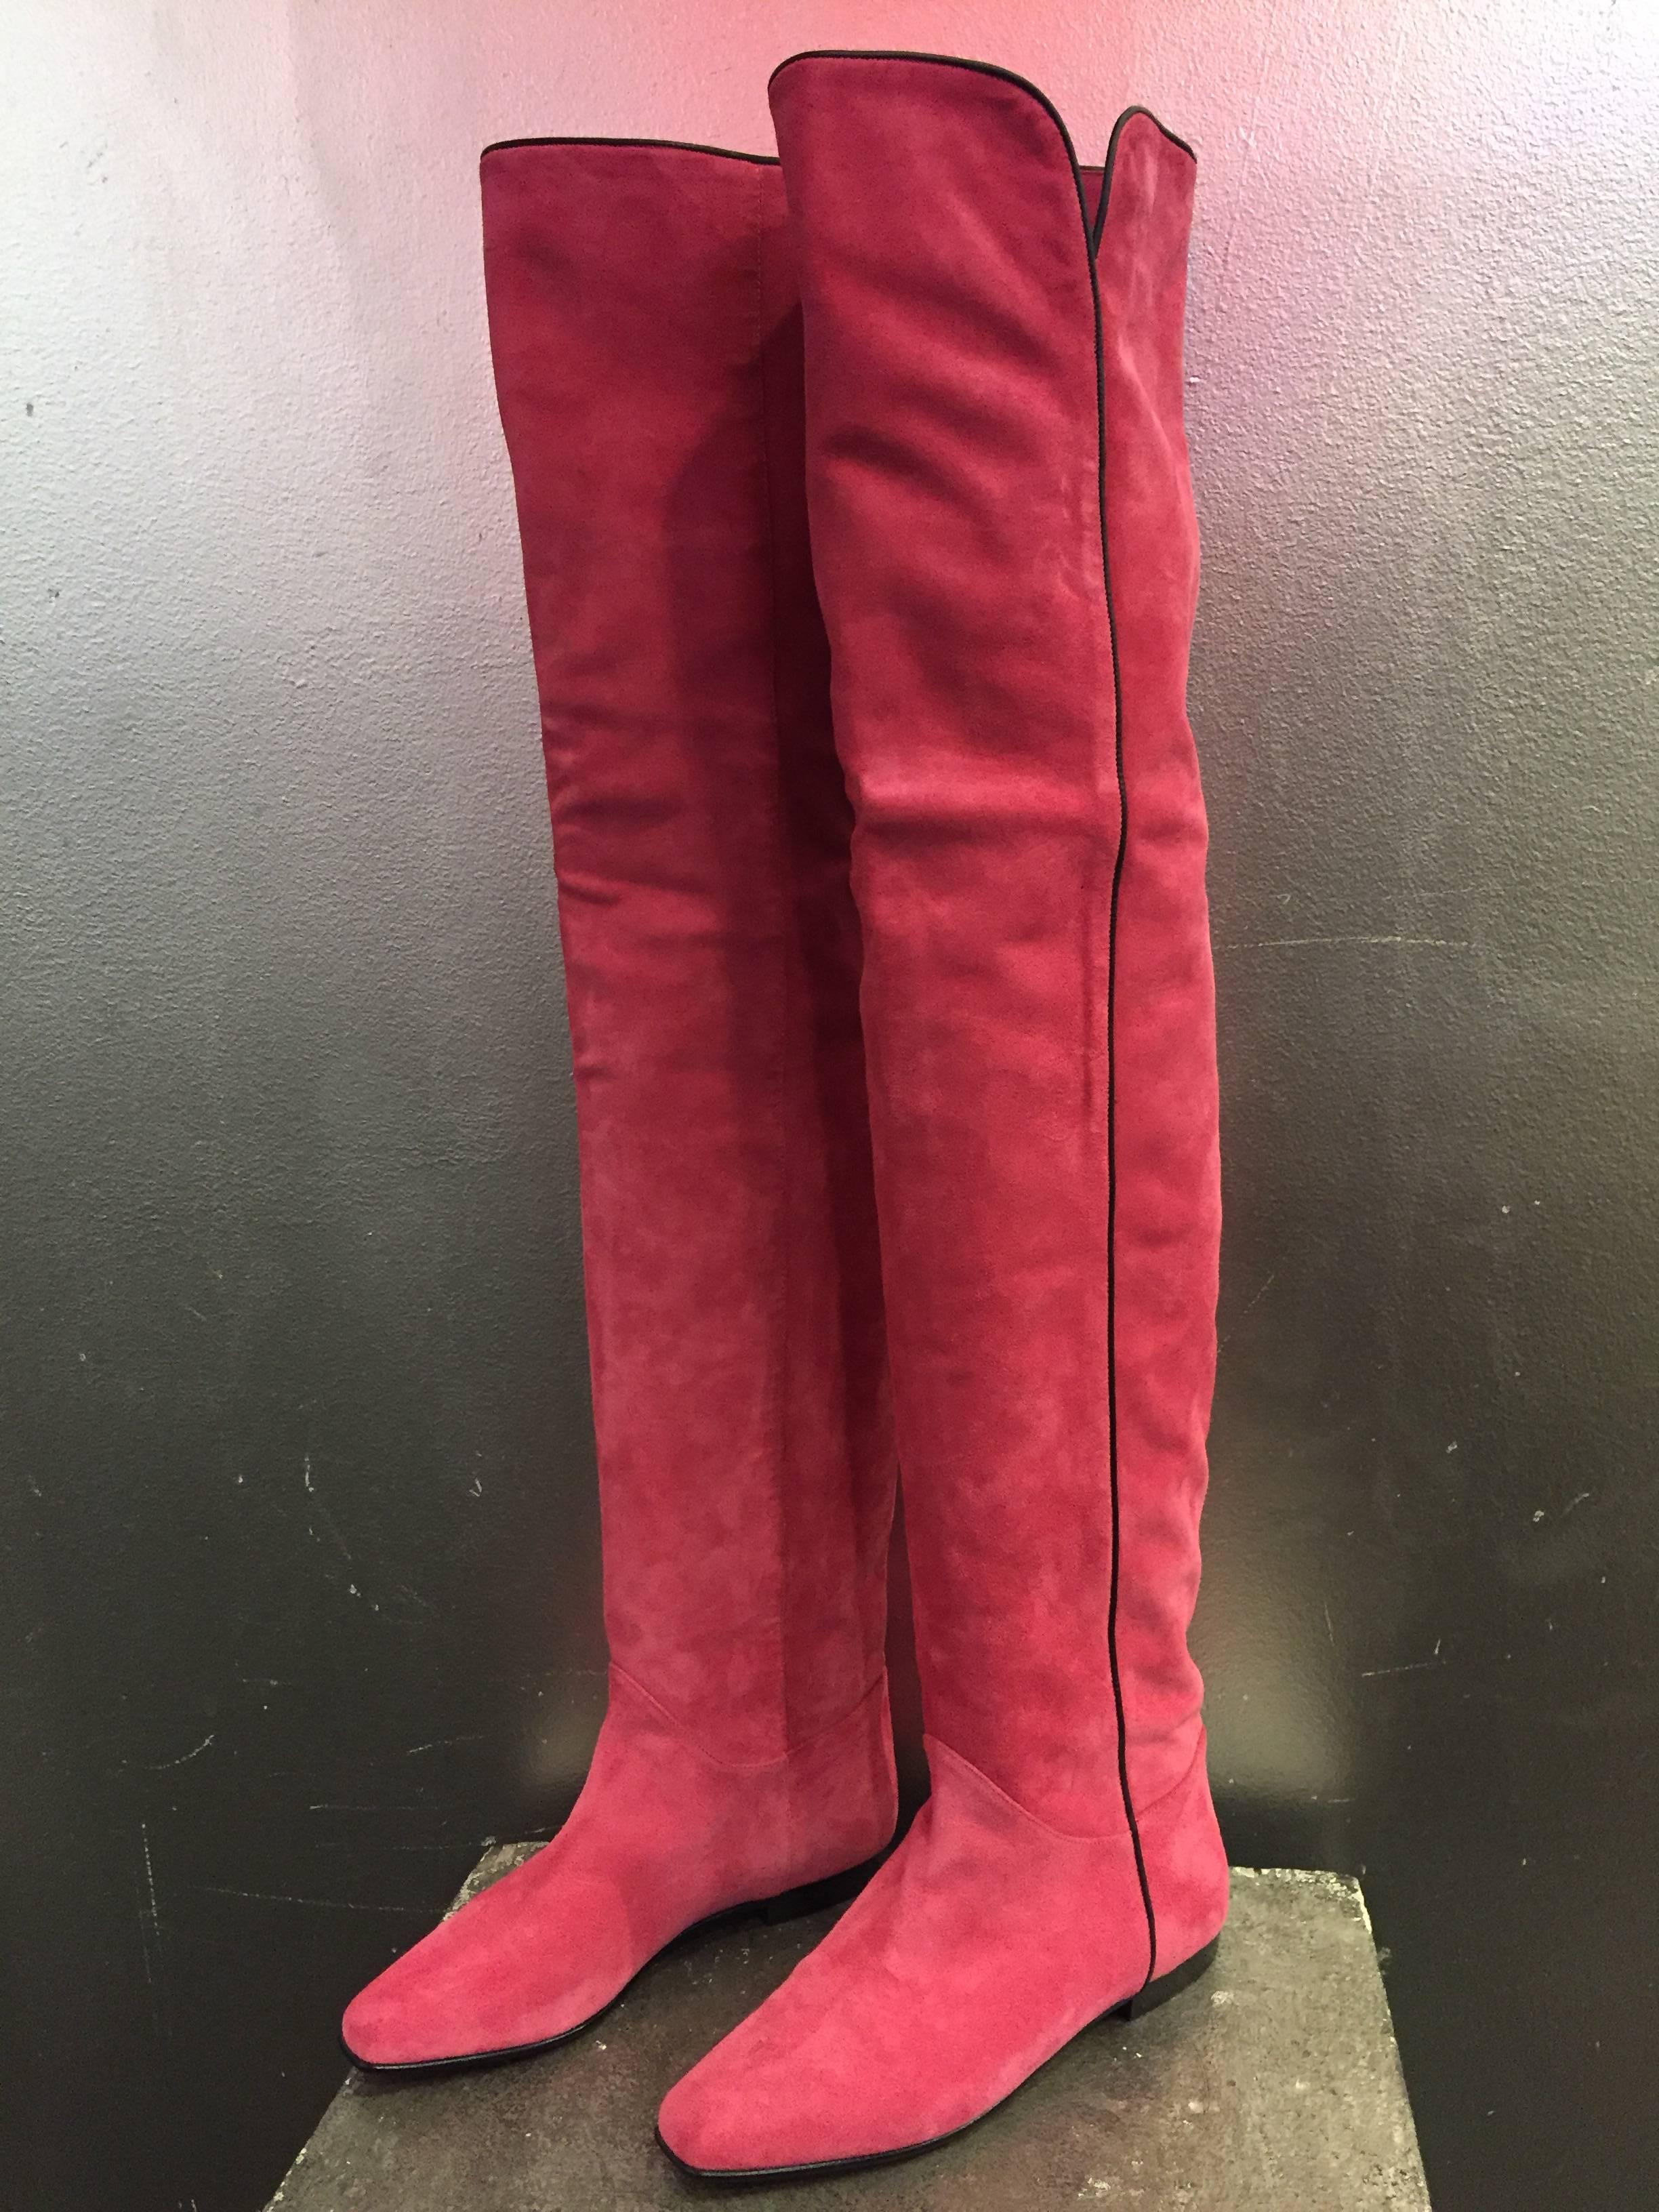 1980s Yves Saint Laurent over-the-knee pink suede flat boots w black piping.  Squared toe box. Never worn. Size 7M. 